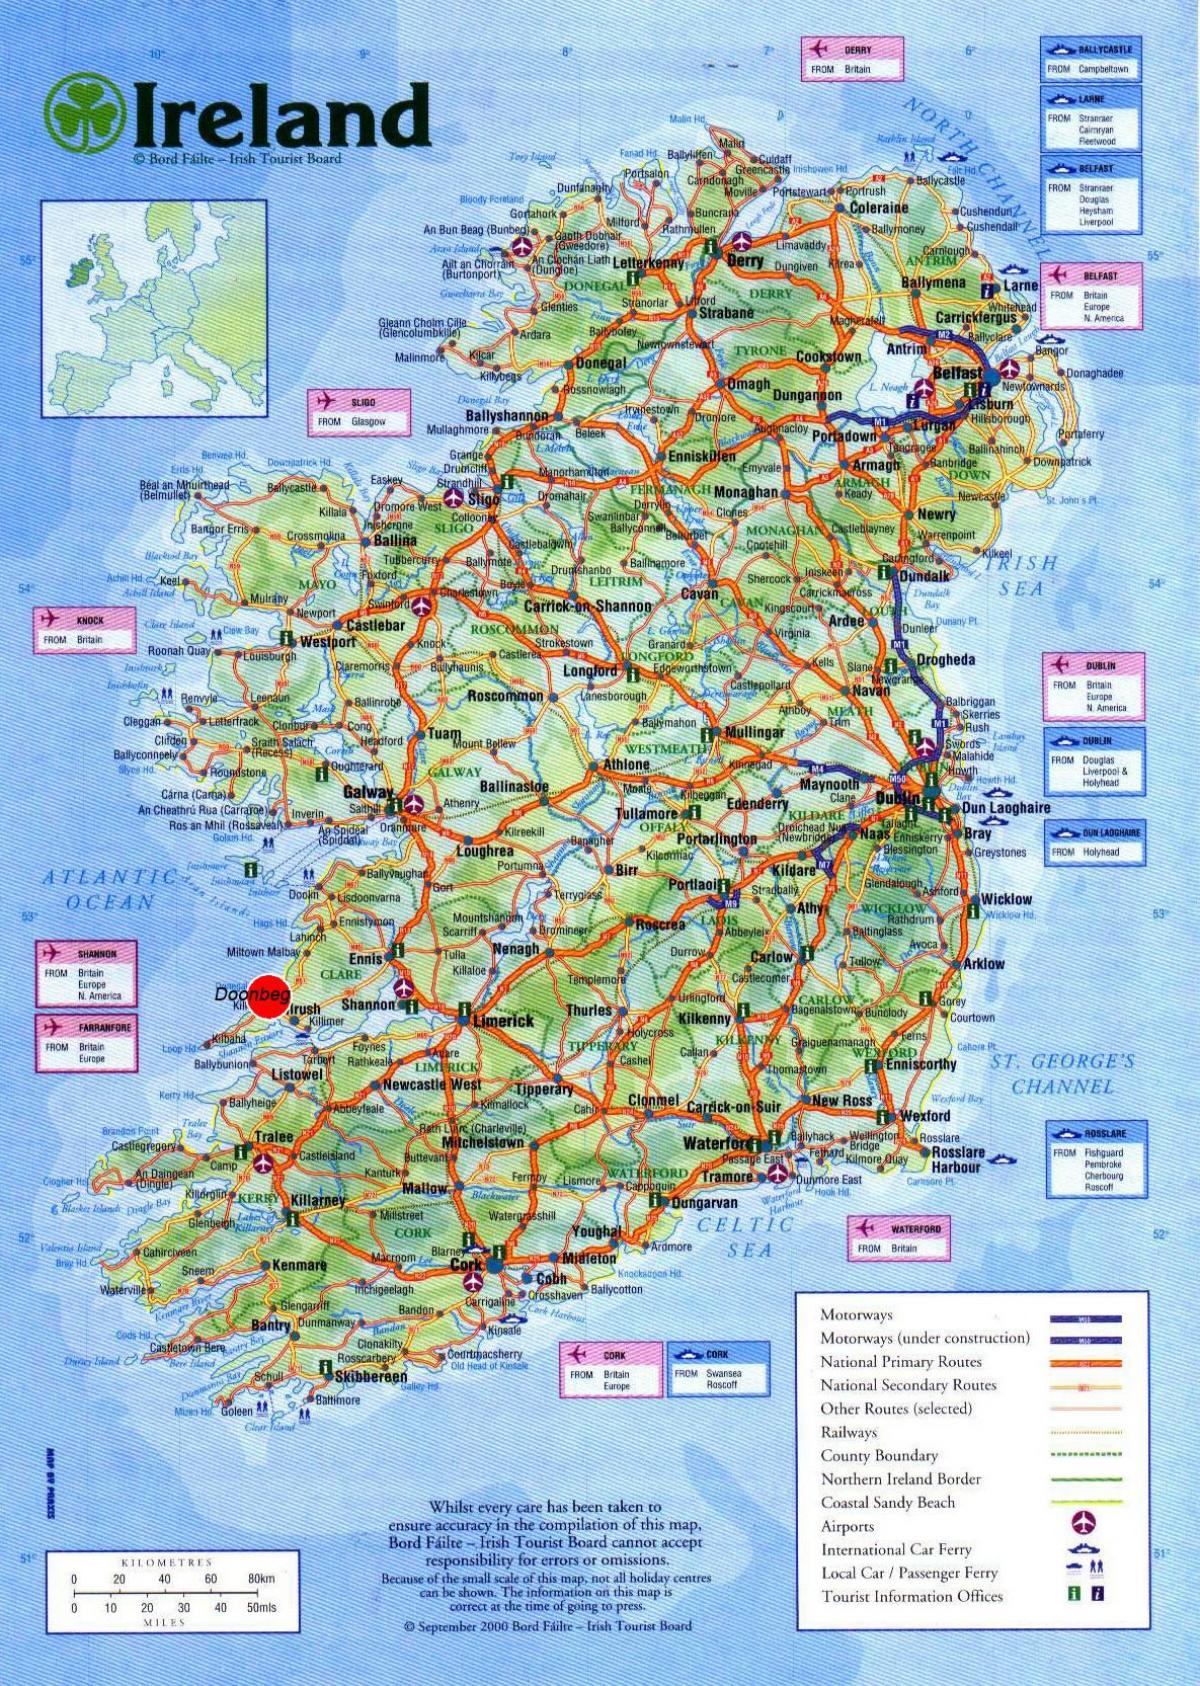 Ireland tourist attractions map - Map of ireland showing tourist